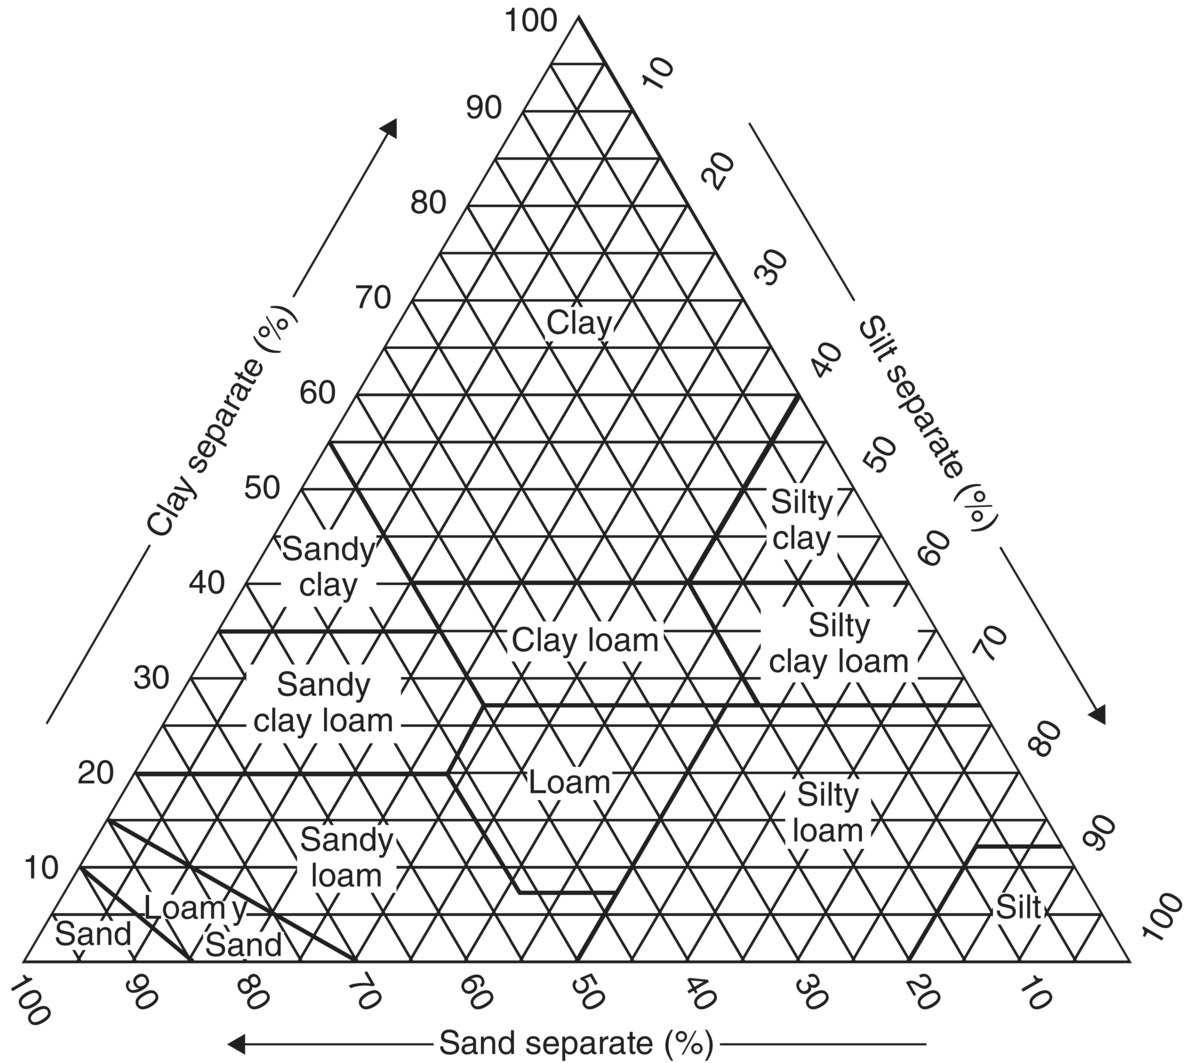 Soil textural triangle with sides labeled clay (left leg), silt (right leg), and sand (base) separates. Inside are seamless pattern of equilateral triangles and texts clay, sandy clay, sandy clay foam, sandy foam, etc.